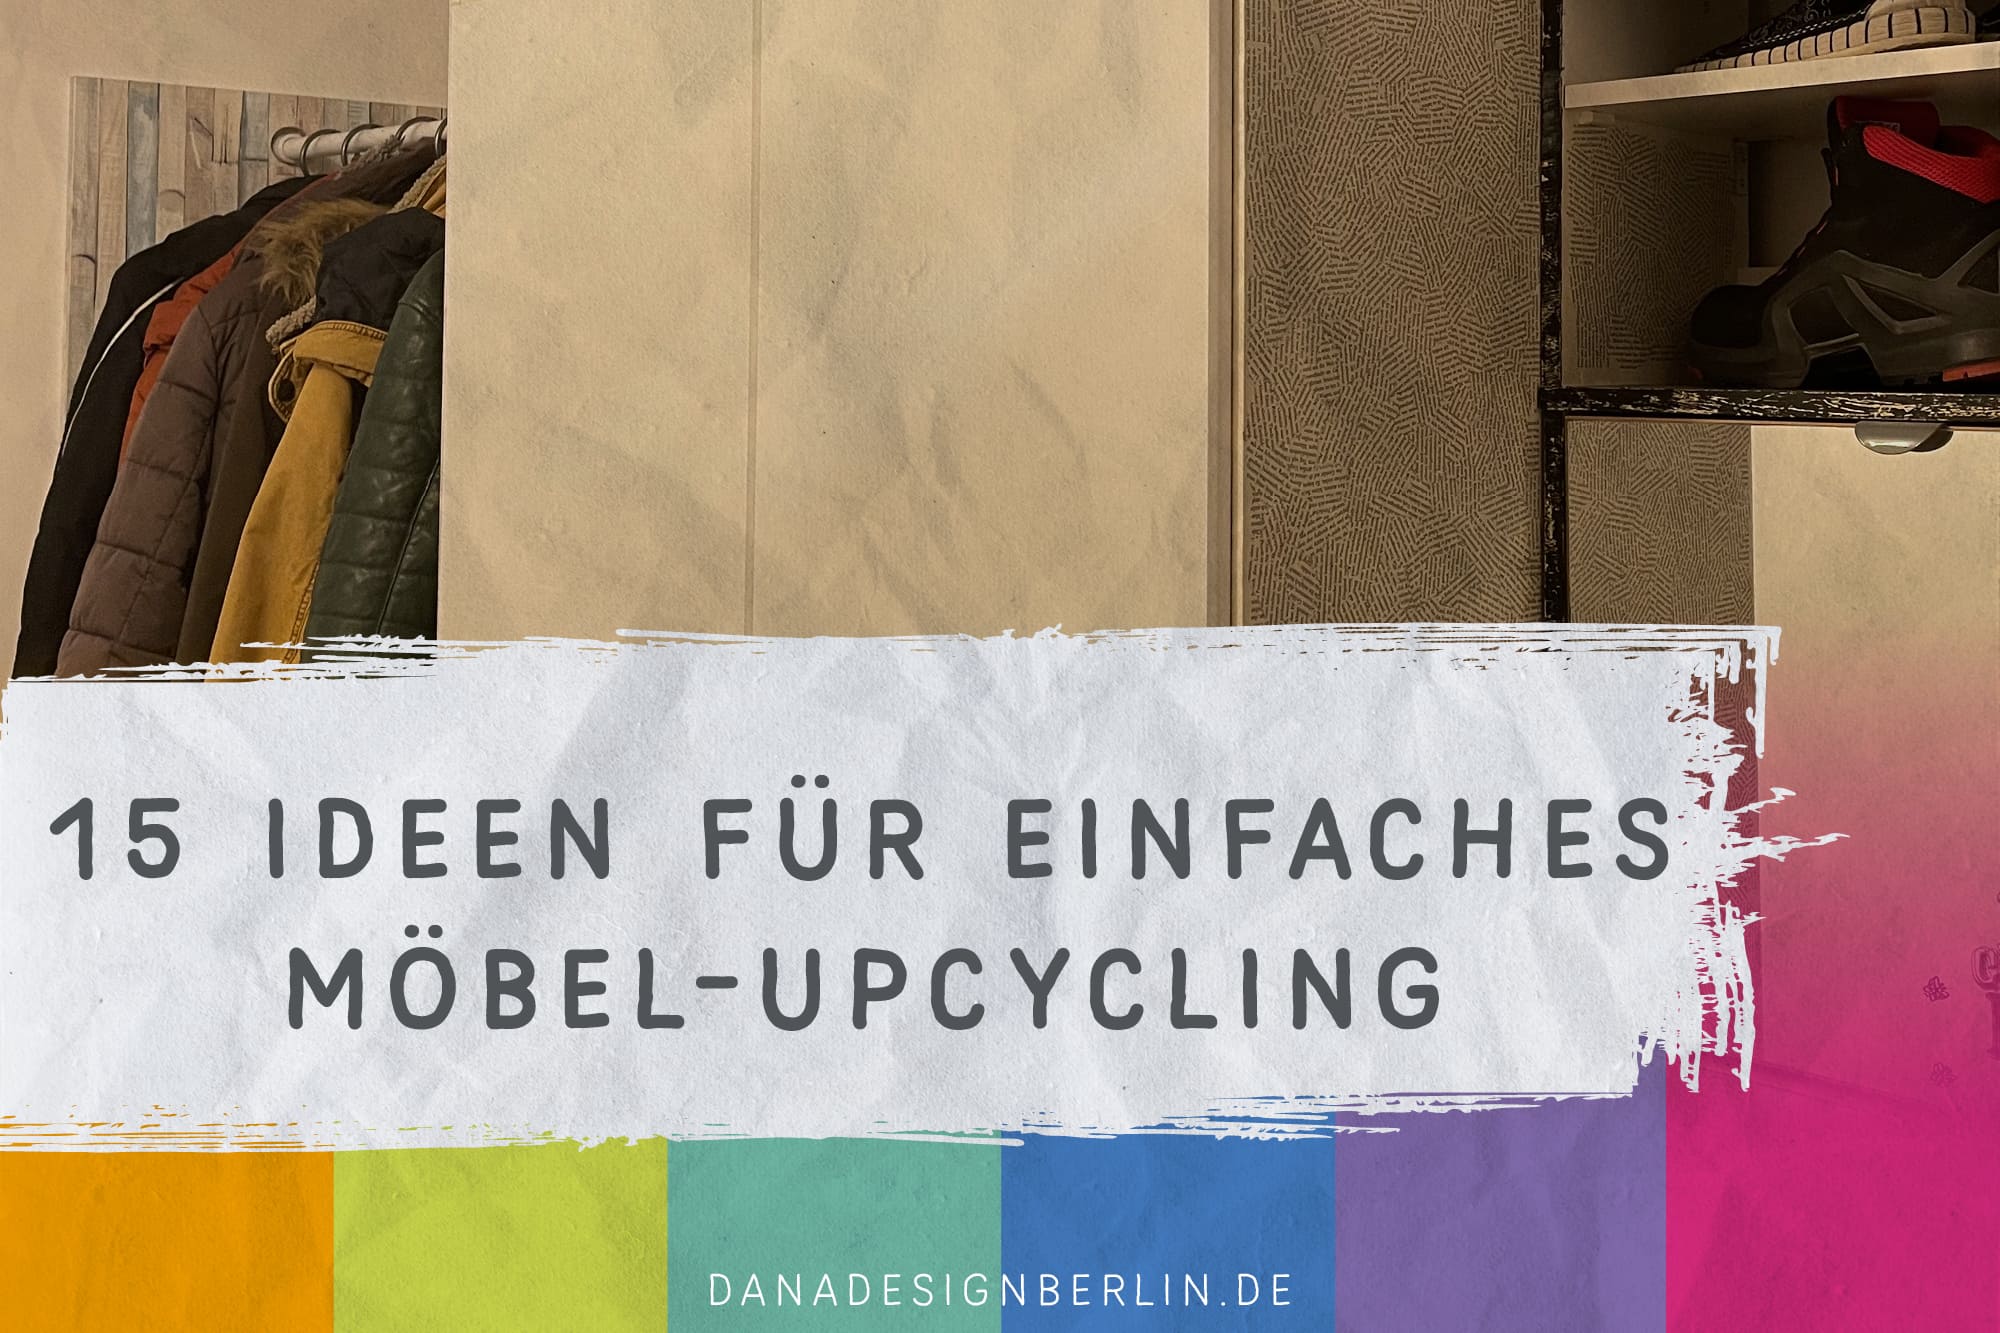 You are currently viewing 15 Ideen für einfaches Möbel-Upcycling